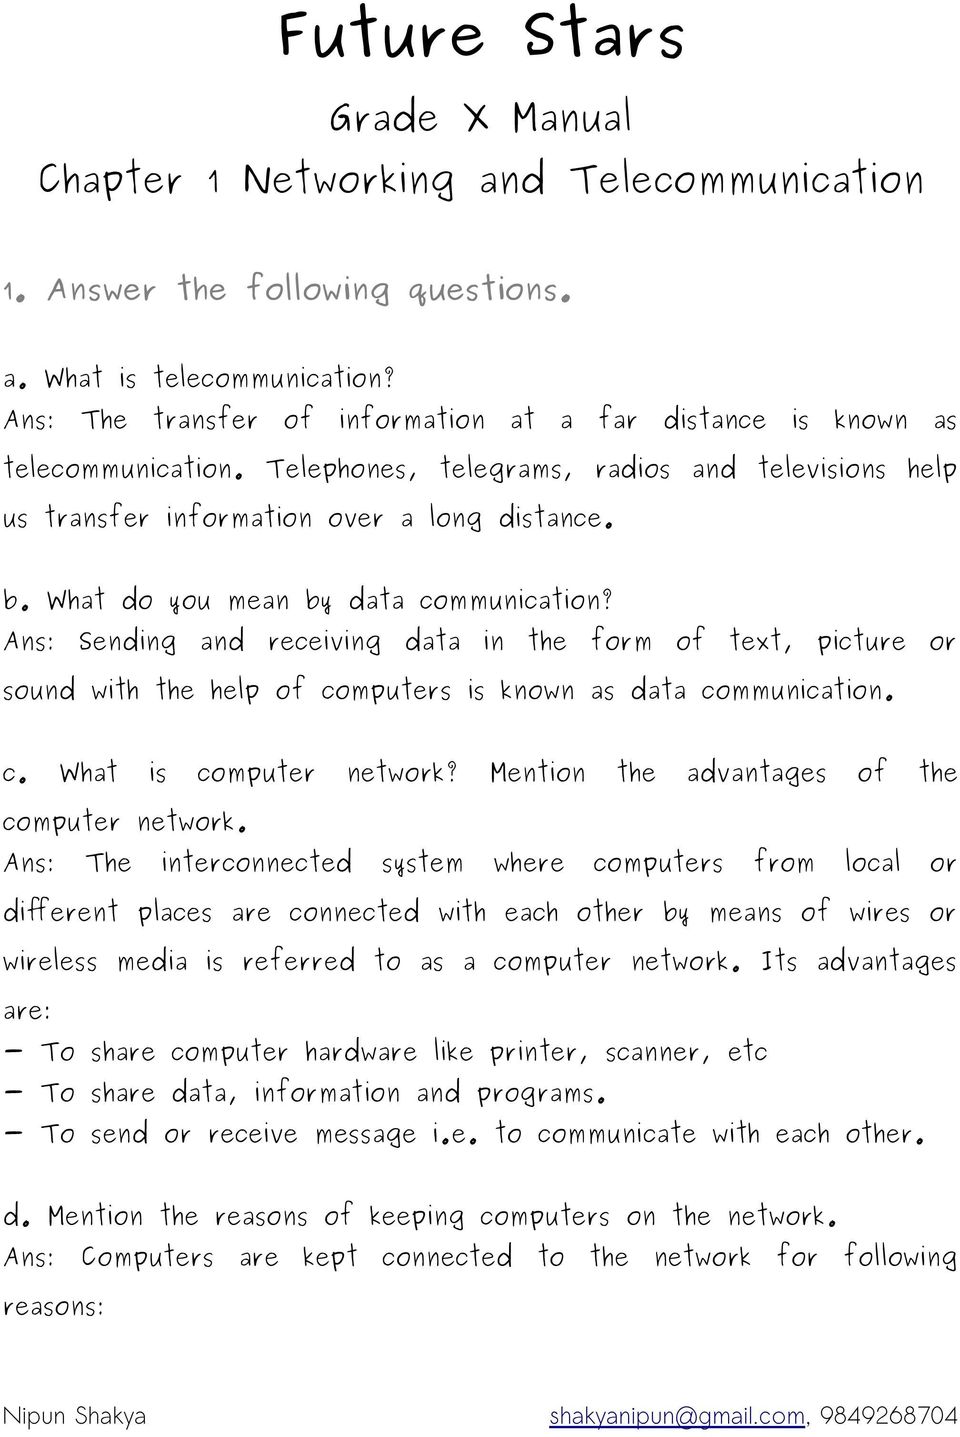 What do you mean by data communication? Ans: Sending and receiving data in the form of text, picture or sound with the help of computers is known as data communication. c. What is computer network?